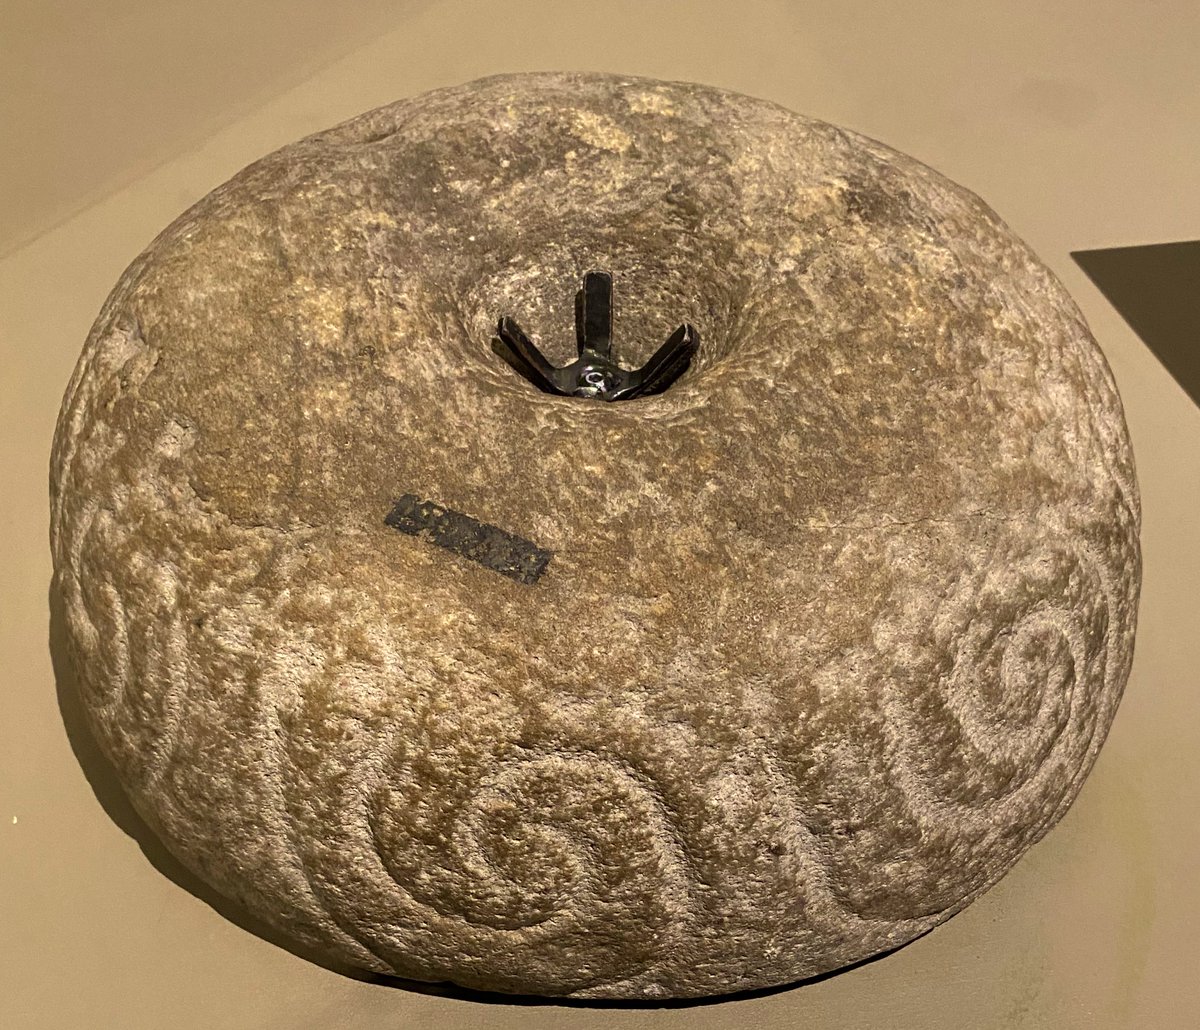 Beehive quern @UlsterMuseum #findsfriday - love the ornamentation on this one!